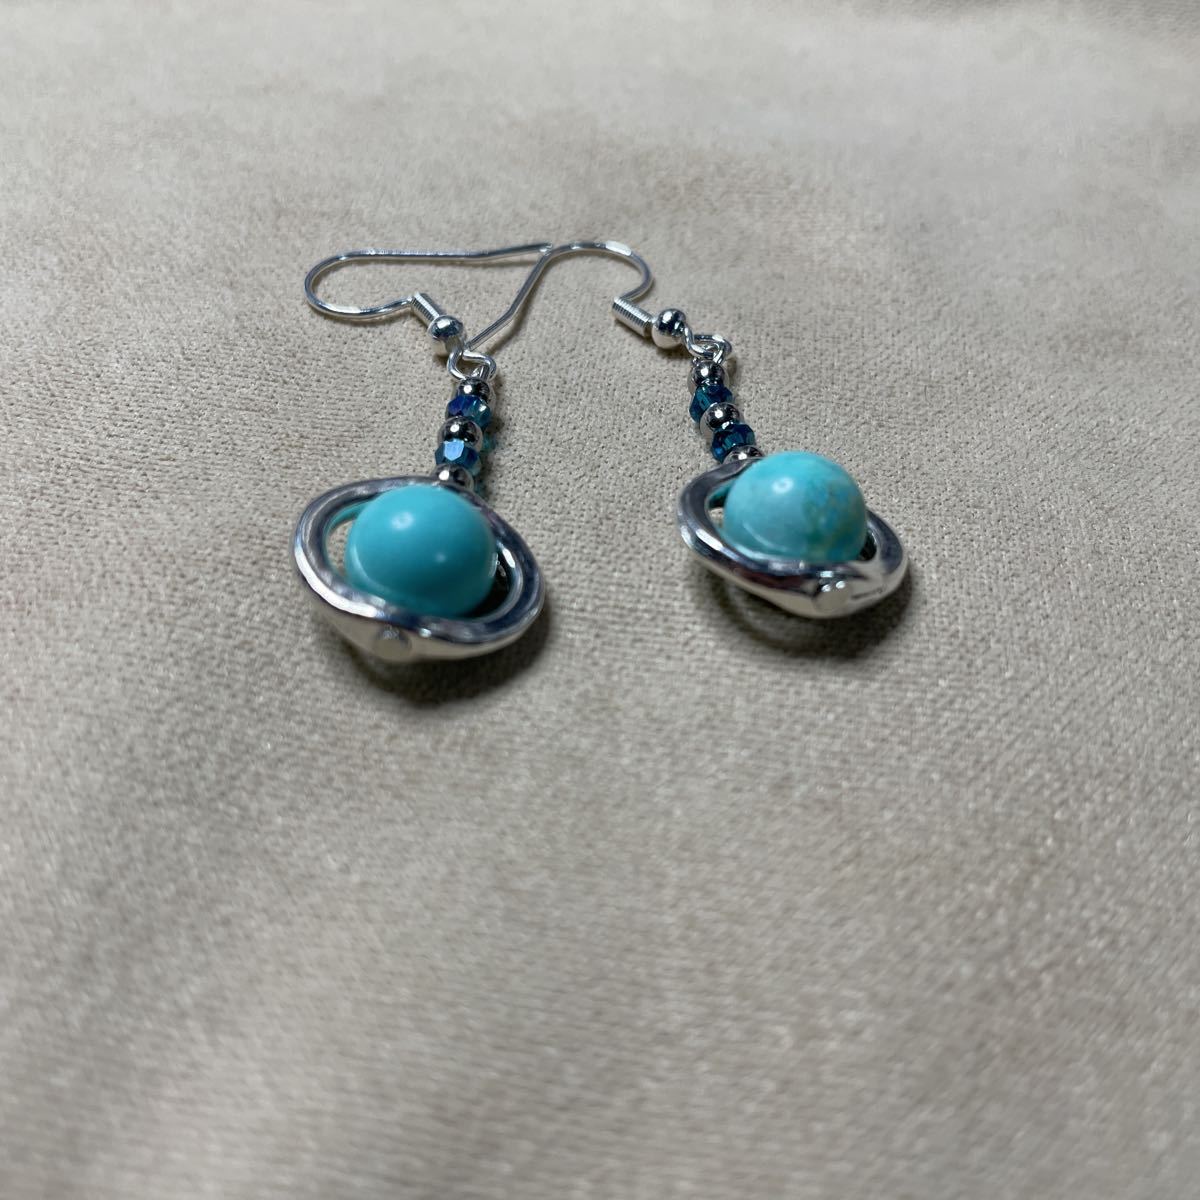  turquoise . ring parts. earrings 